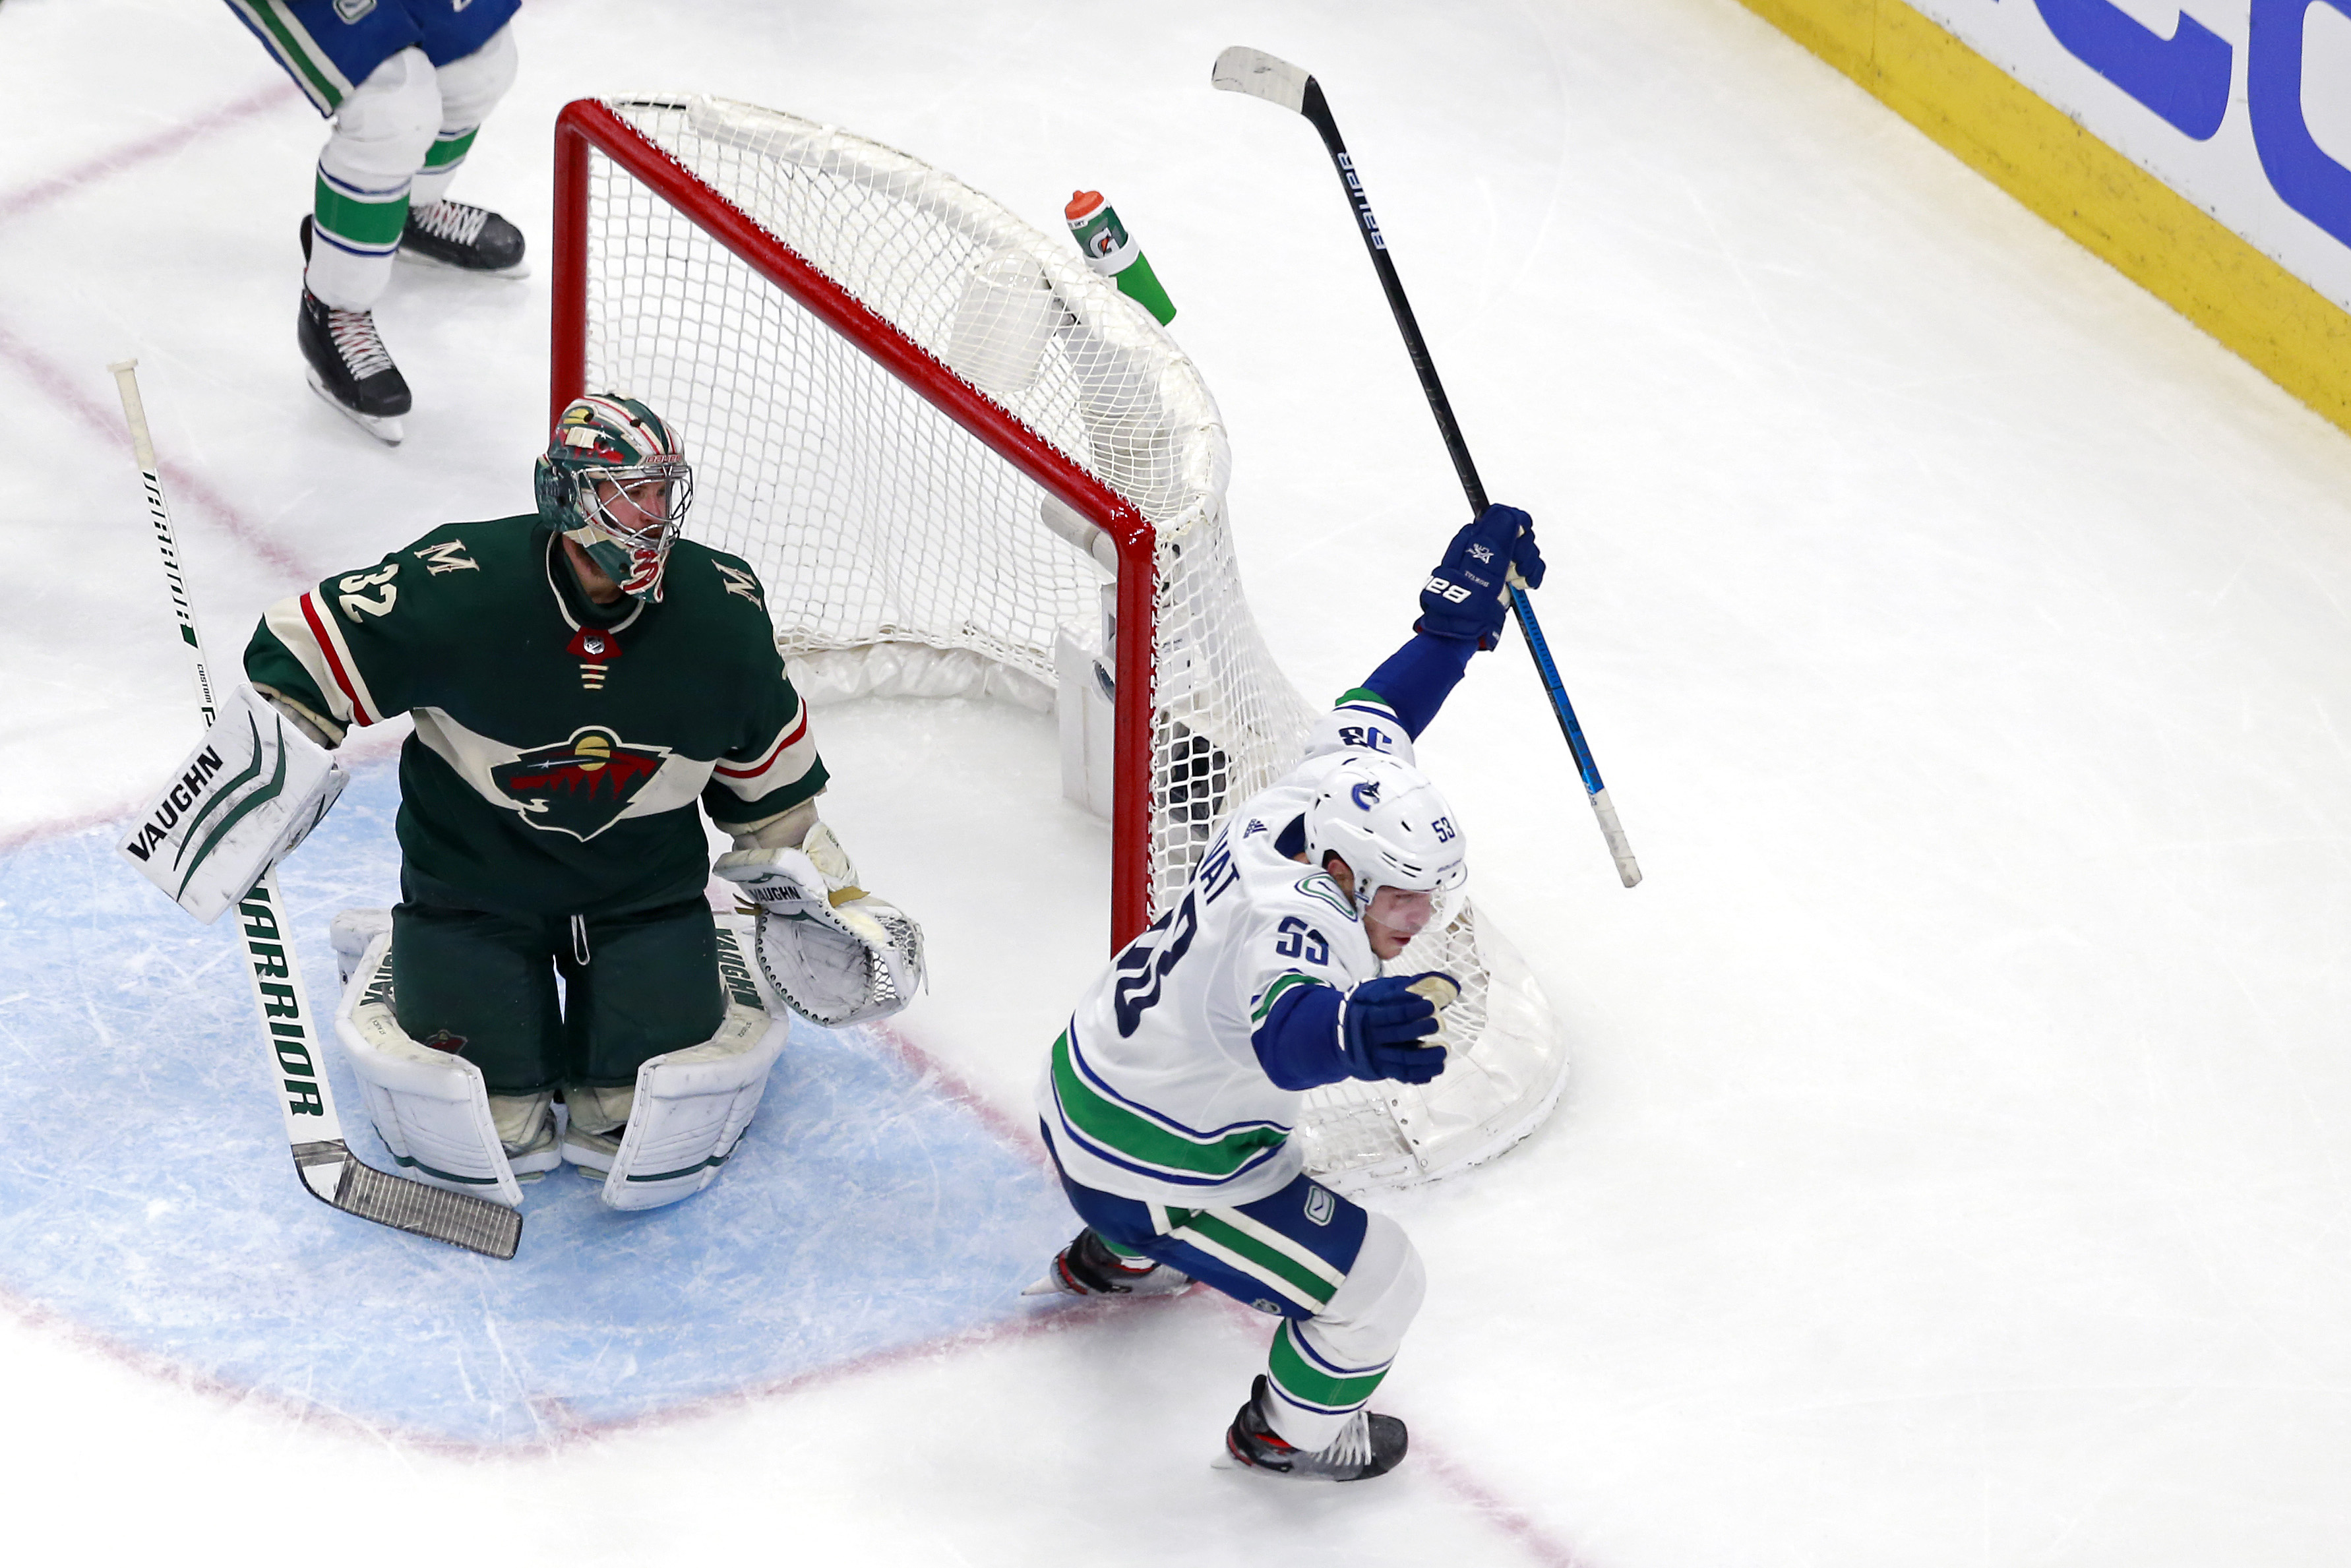 Bo Horvat pictured celebrating a goal, as the Minnesota Wild got eliminated.